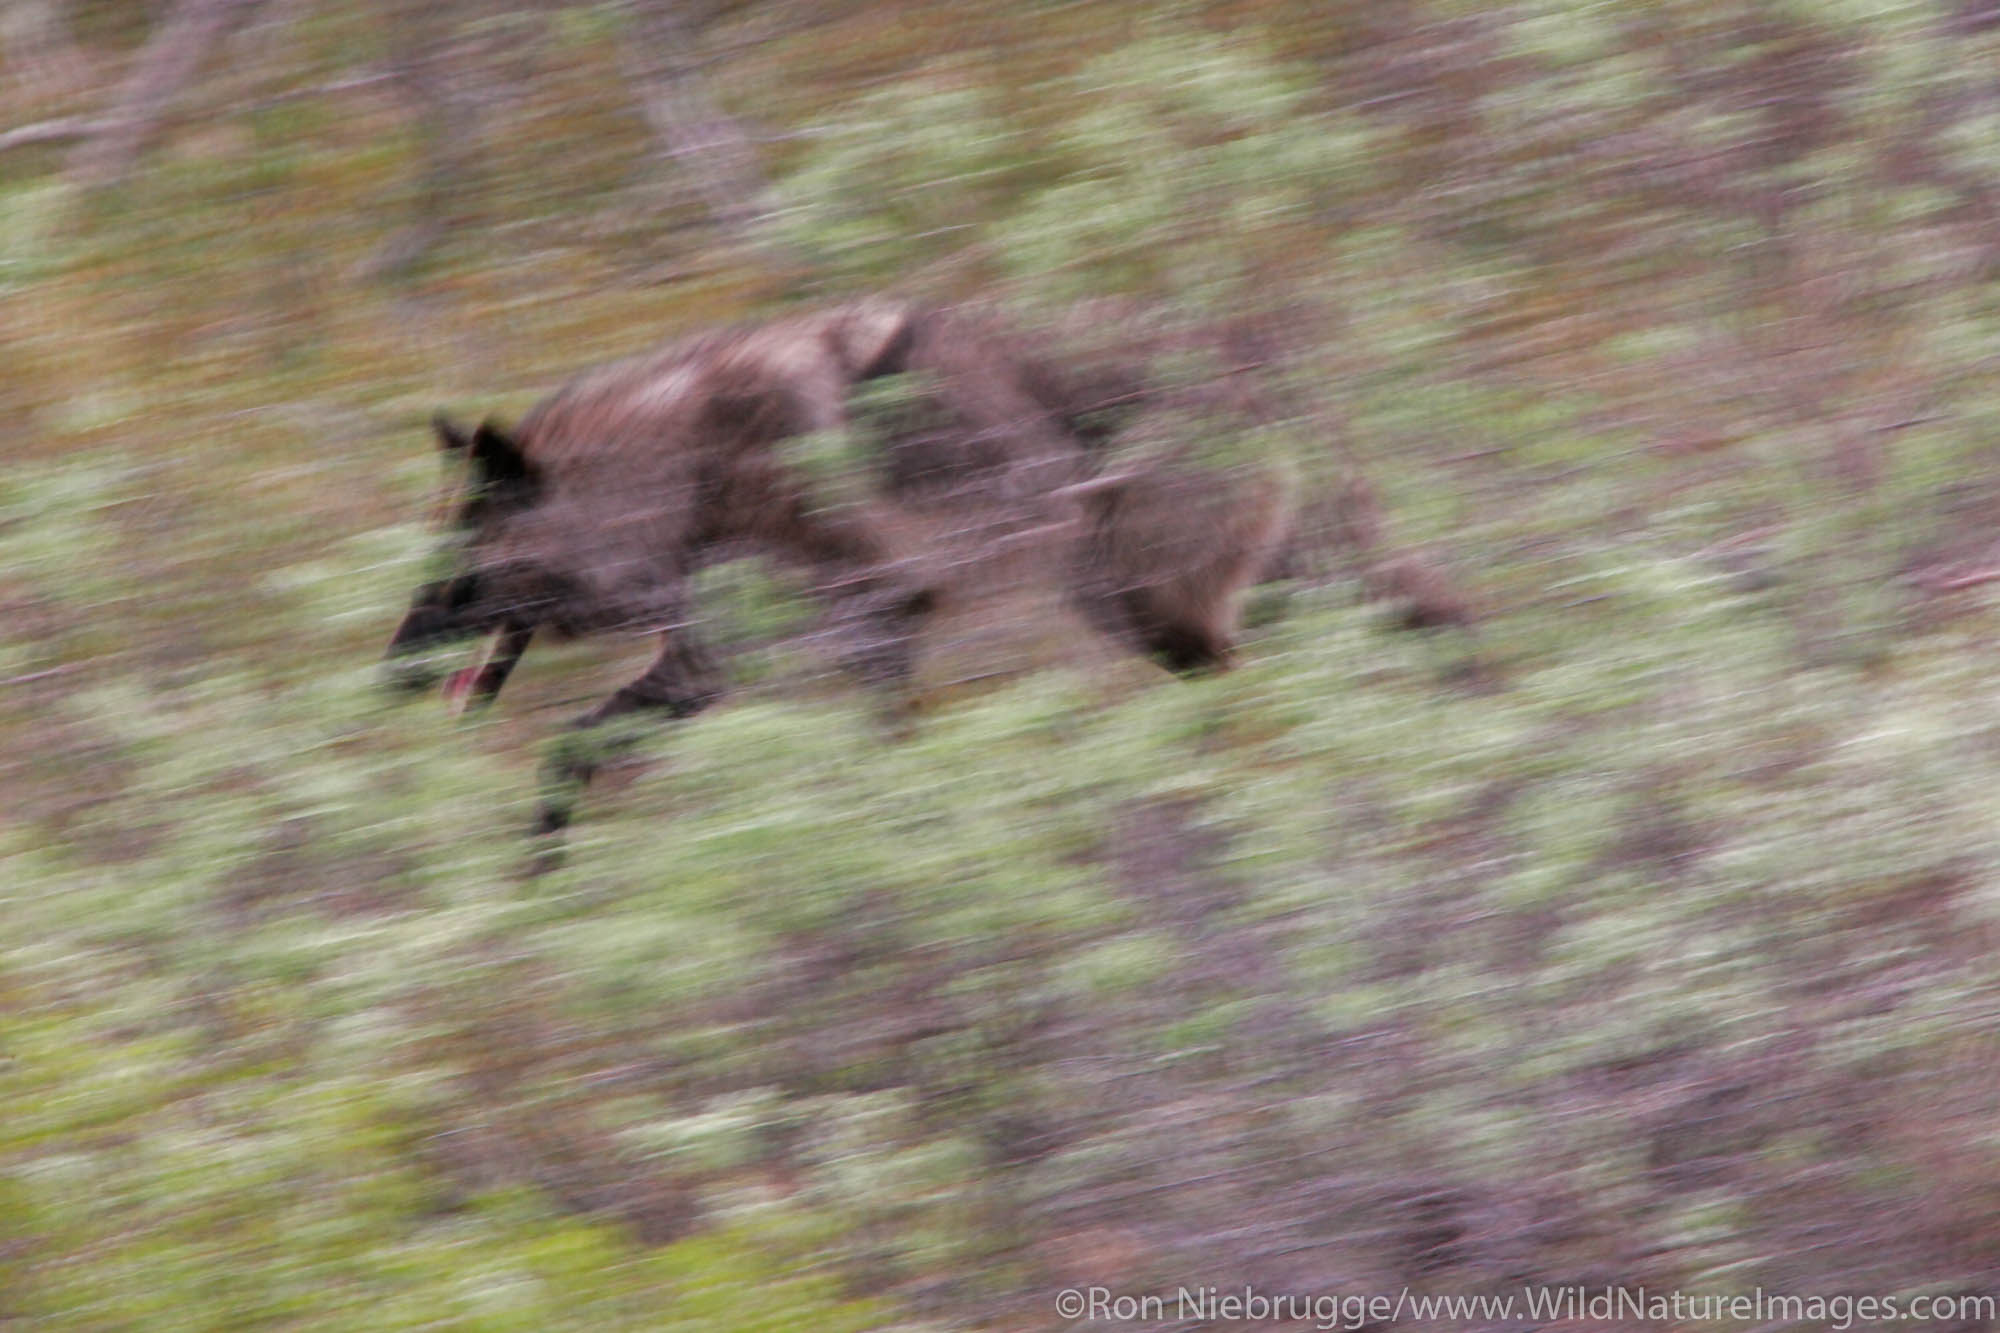 Wolves (Canis lupus) from the Grant Creek pack in Denali National Park, Alaska.